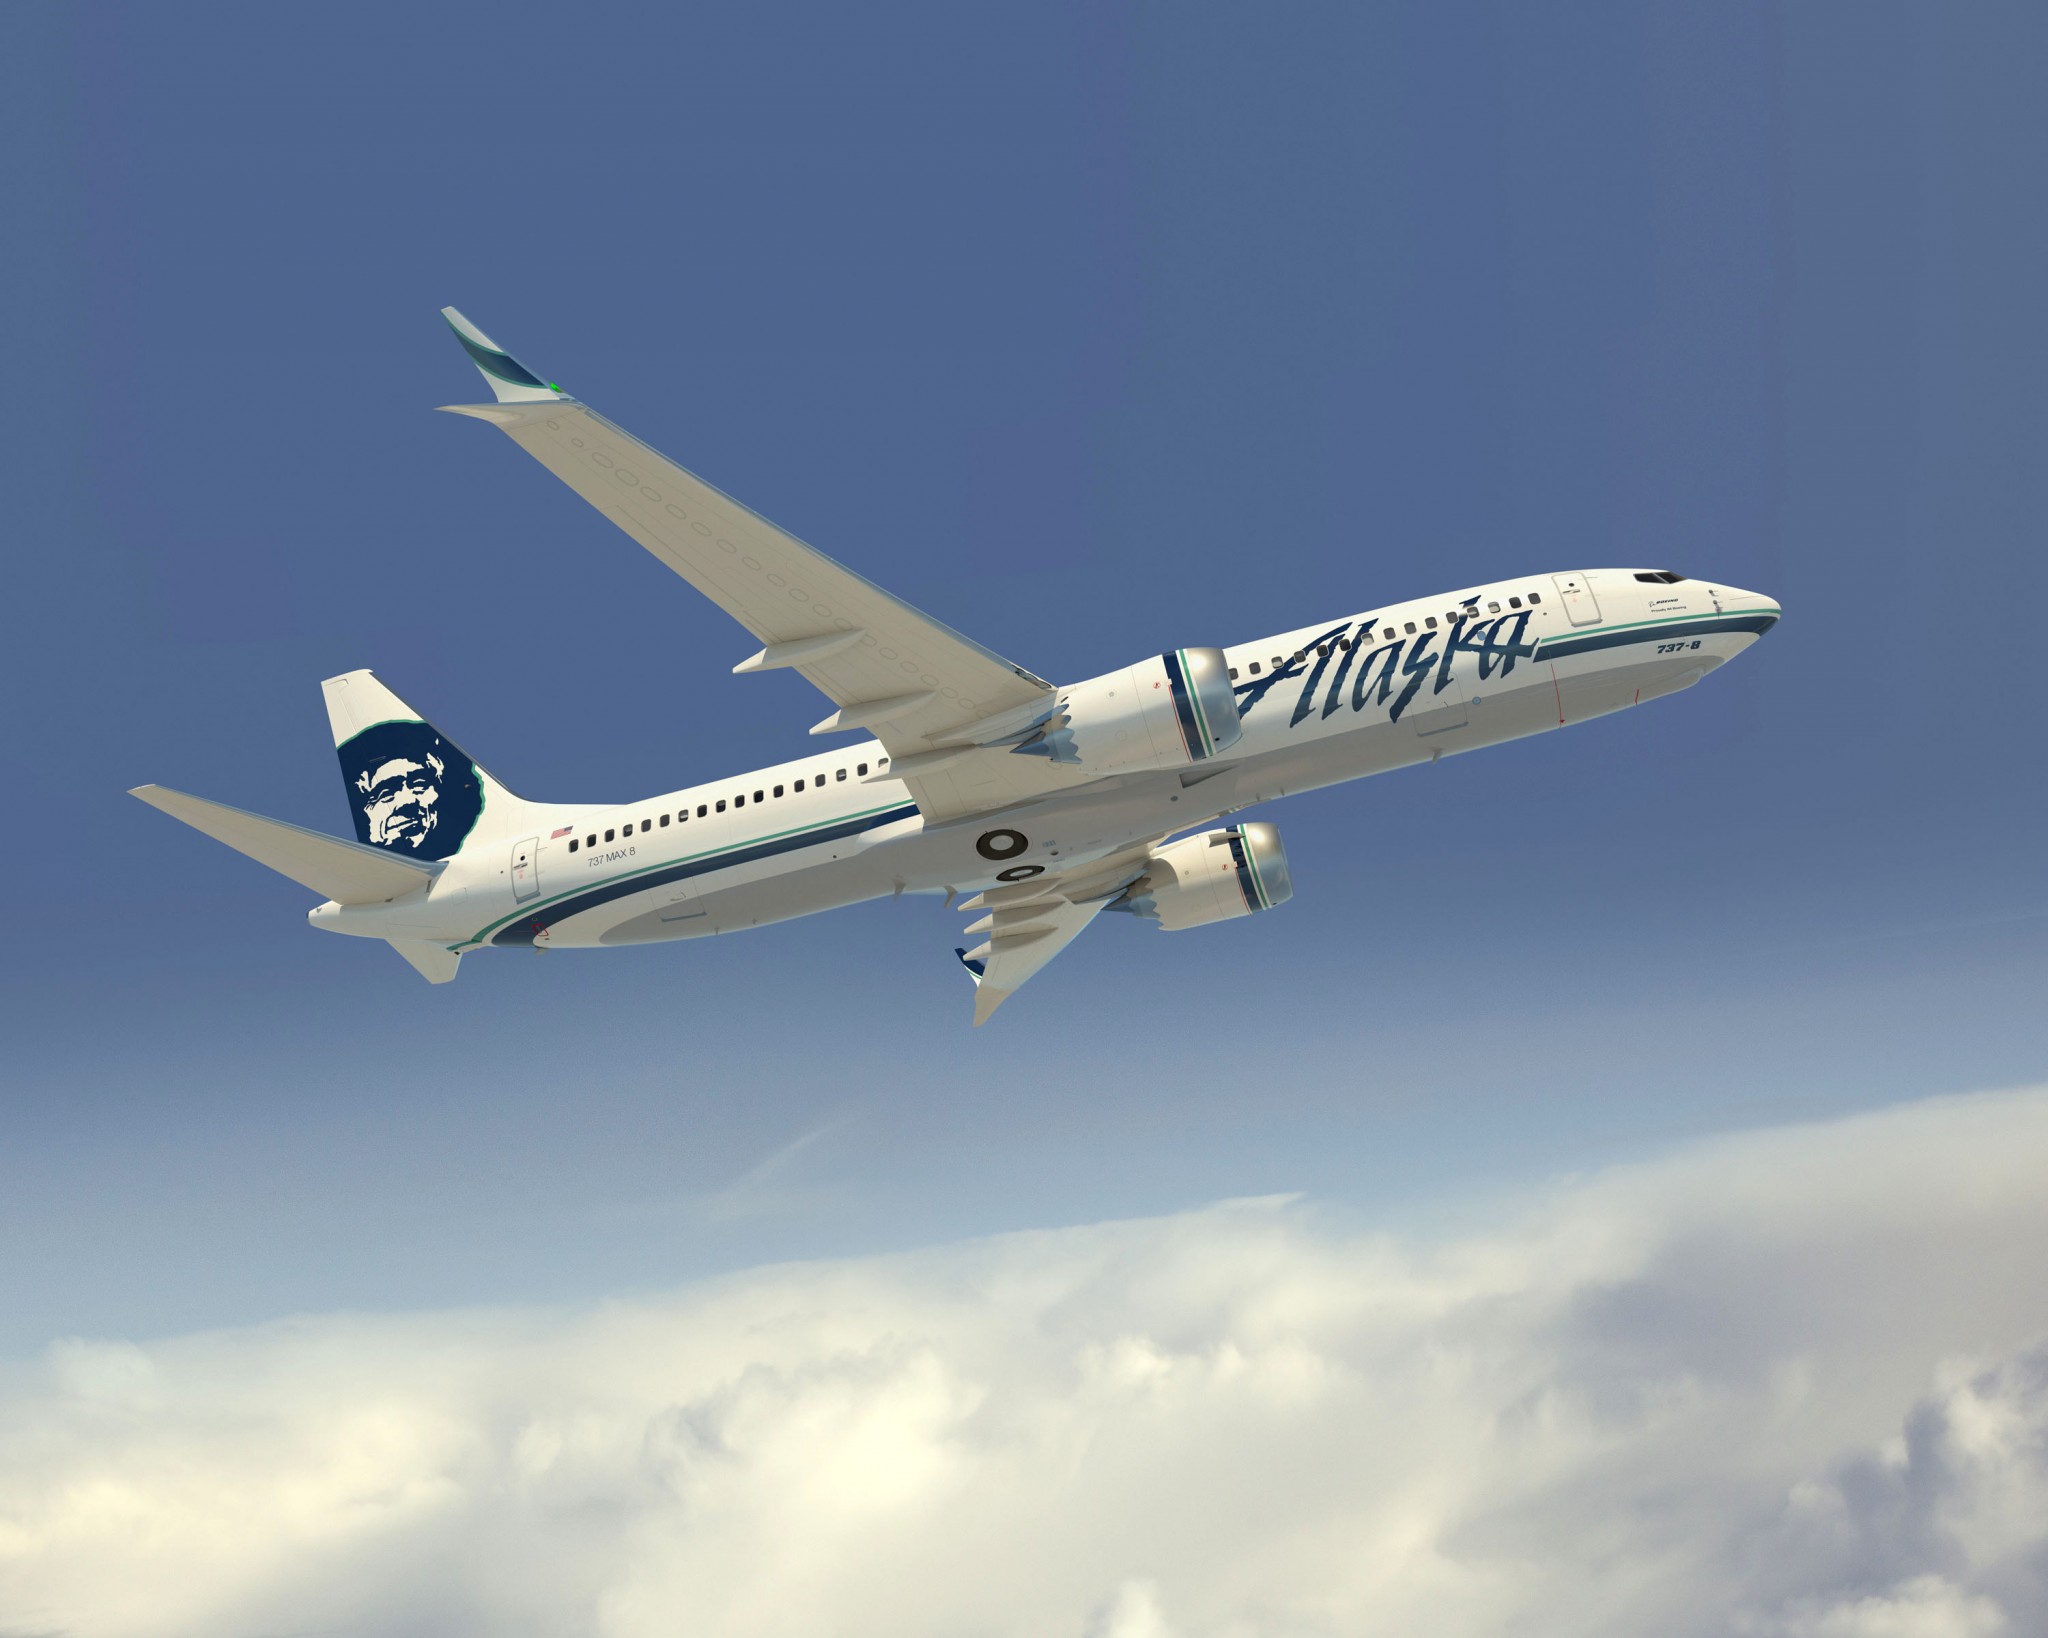 Alaska Air Group reports first quarter 2017 results